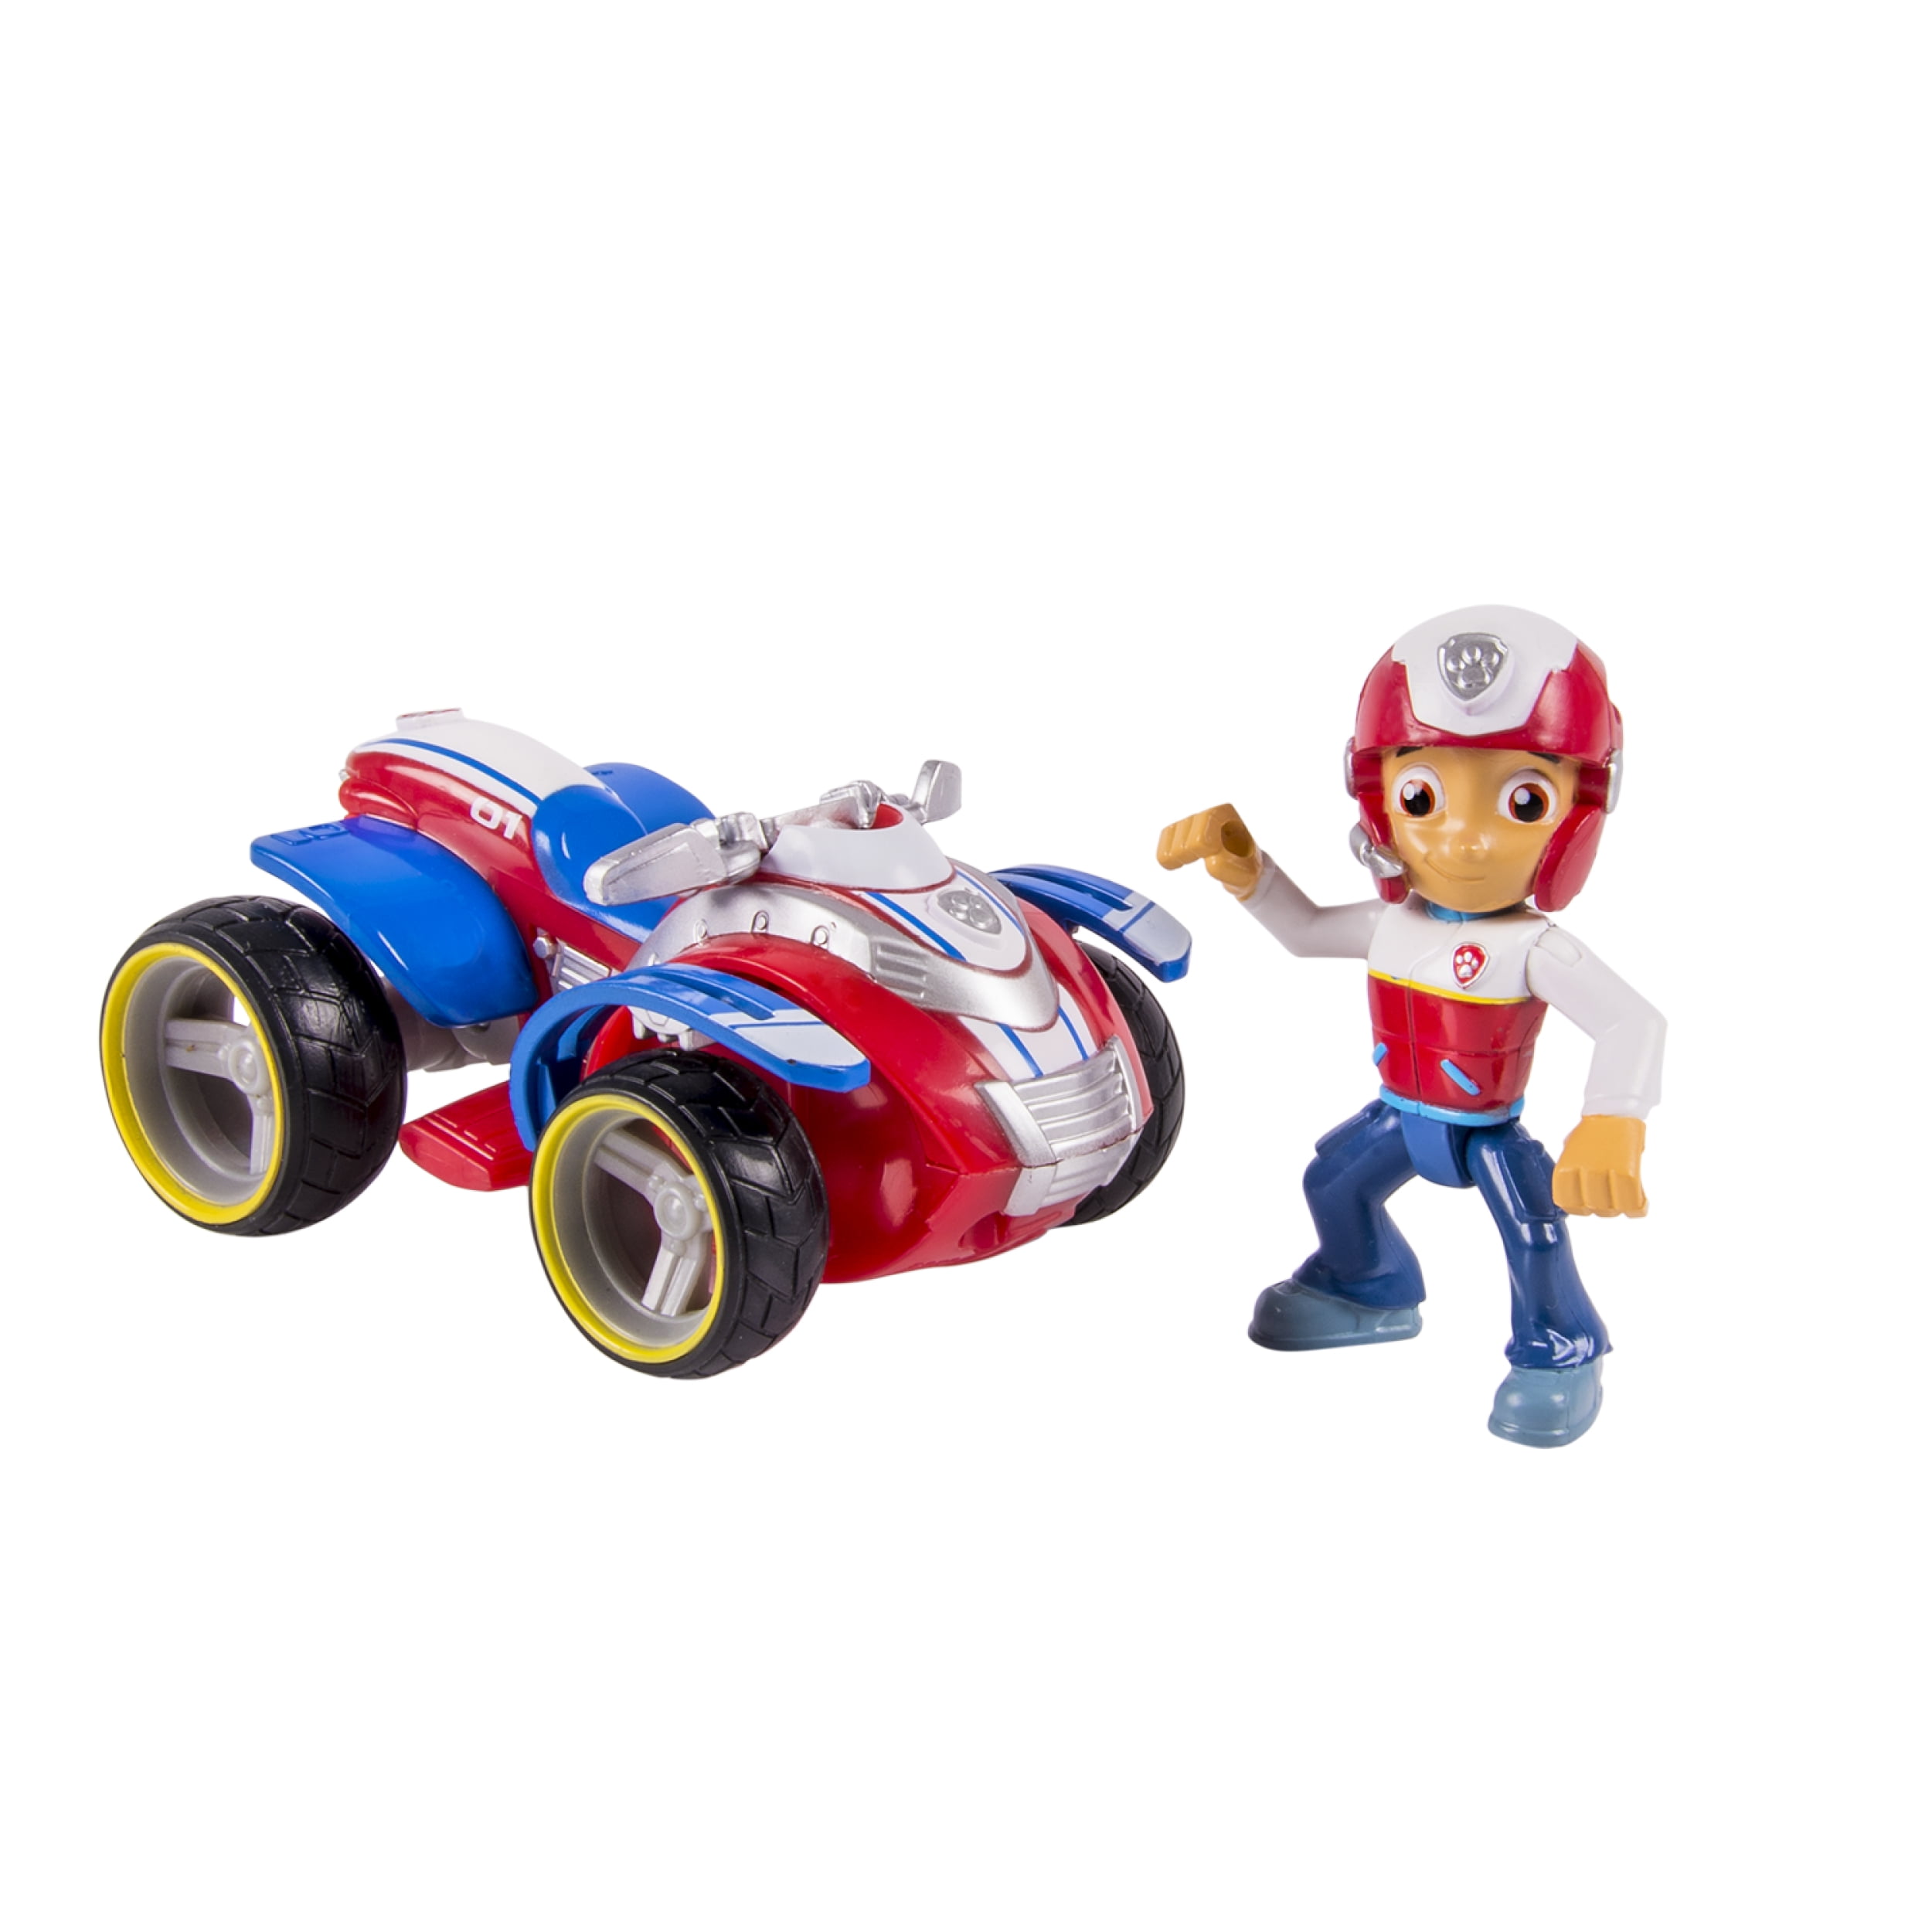 Nickelodeon Paw Patrol Ryder/'s Rescue ATV 6024006 for sale online